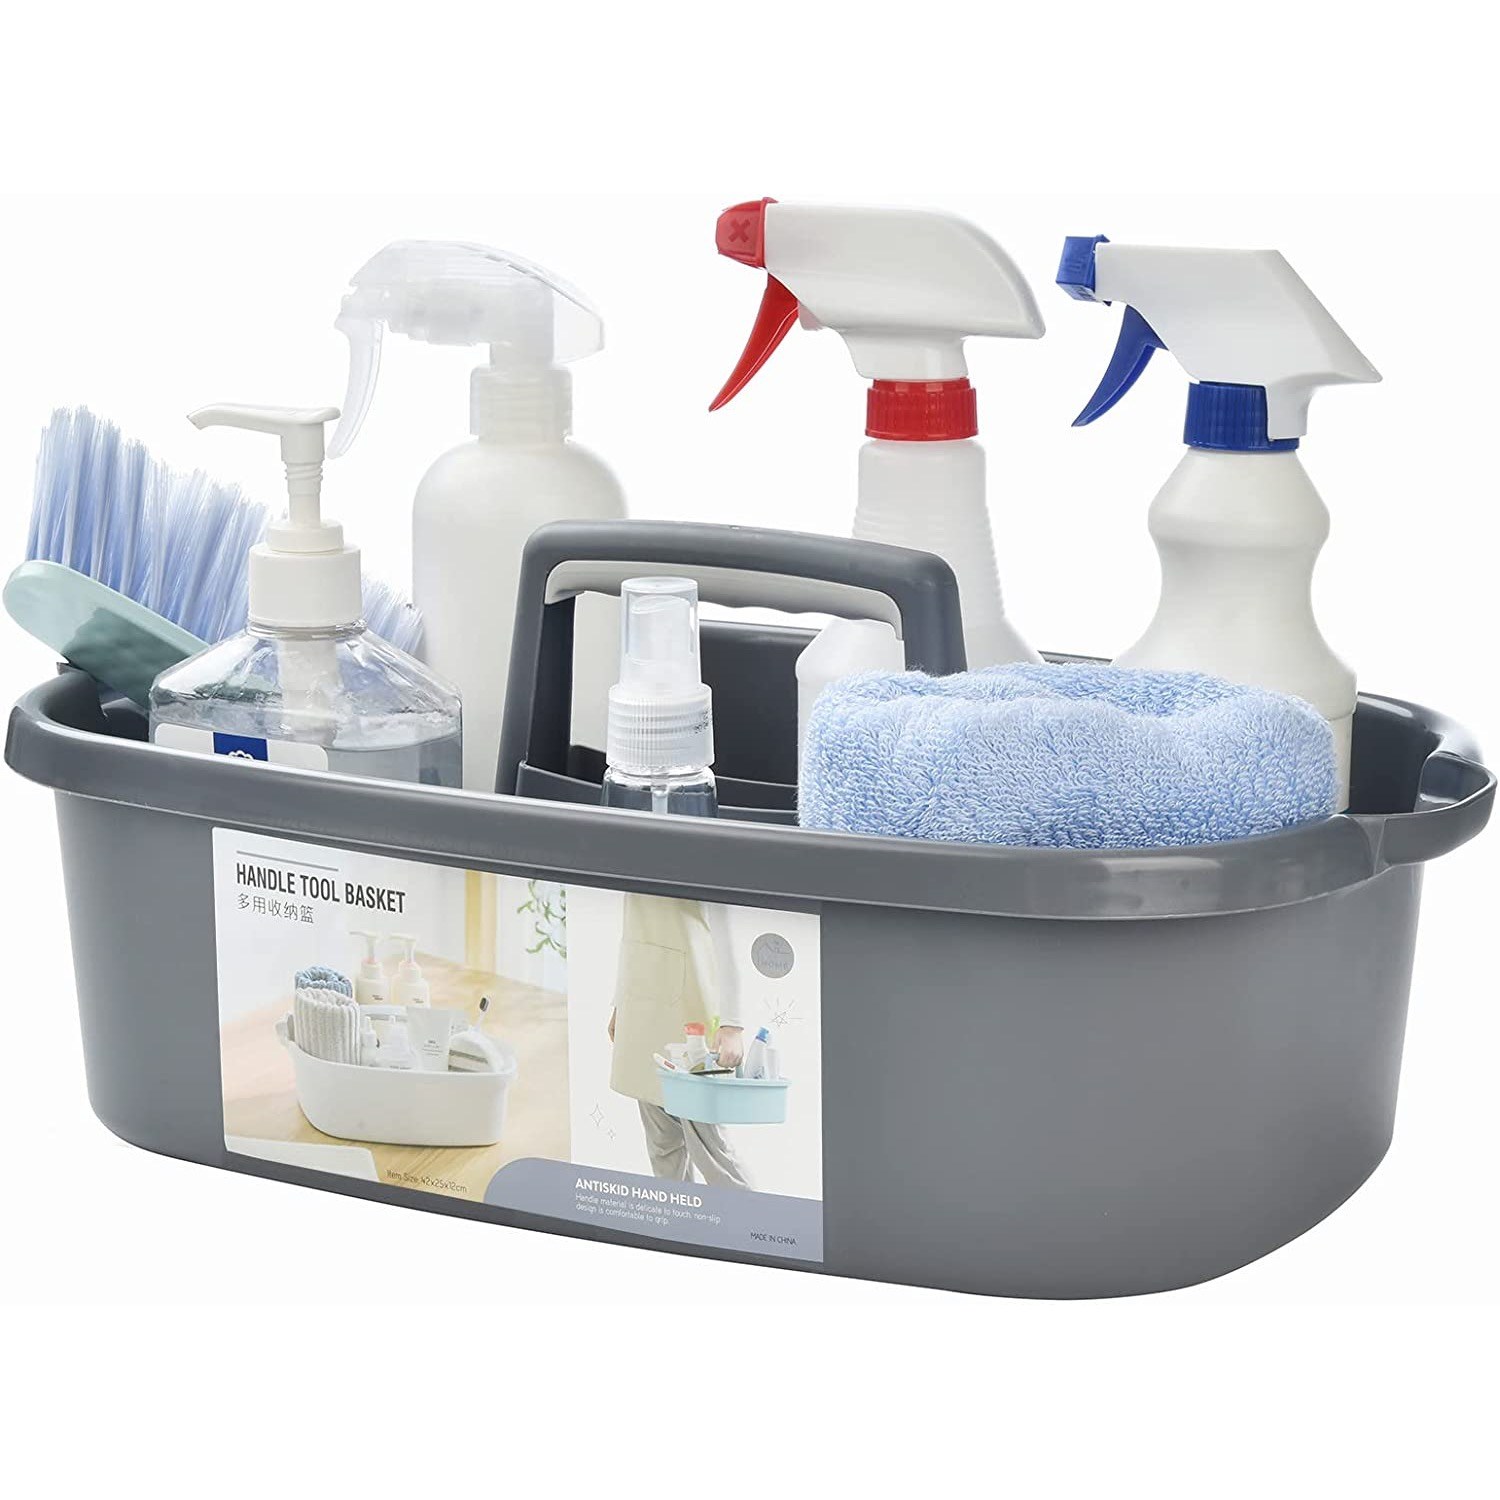 Large Cleaning Caddy with Handle, Wearable Cleaning Supplies